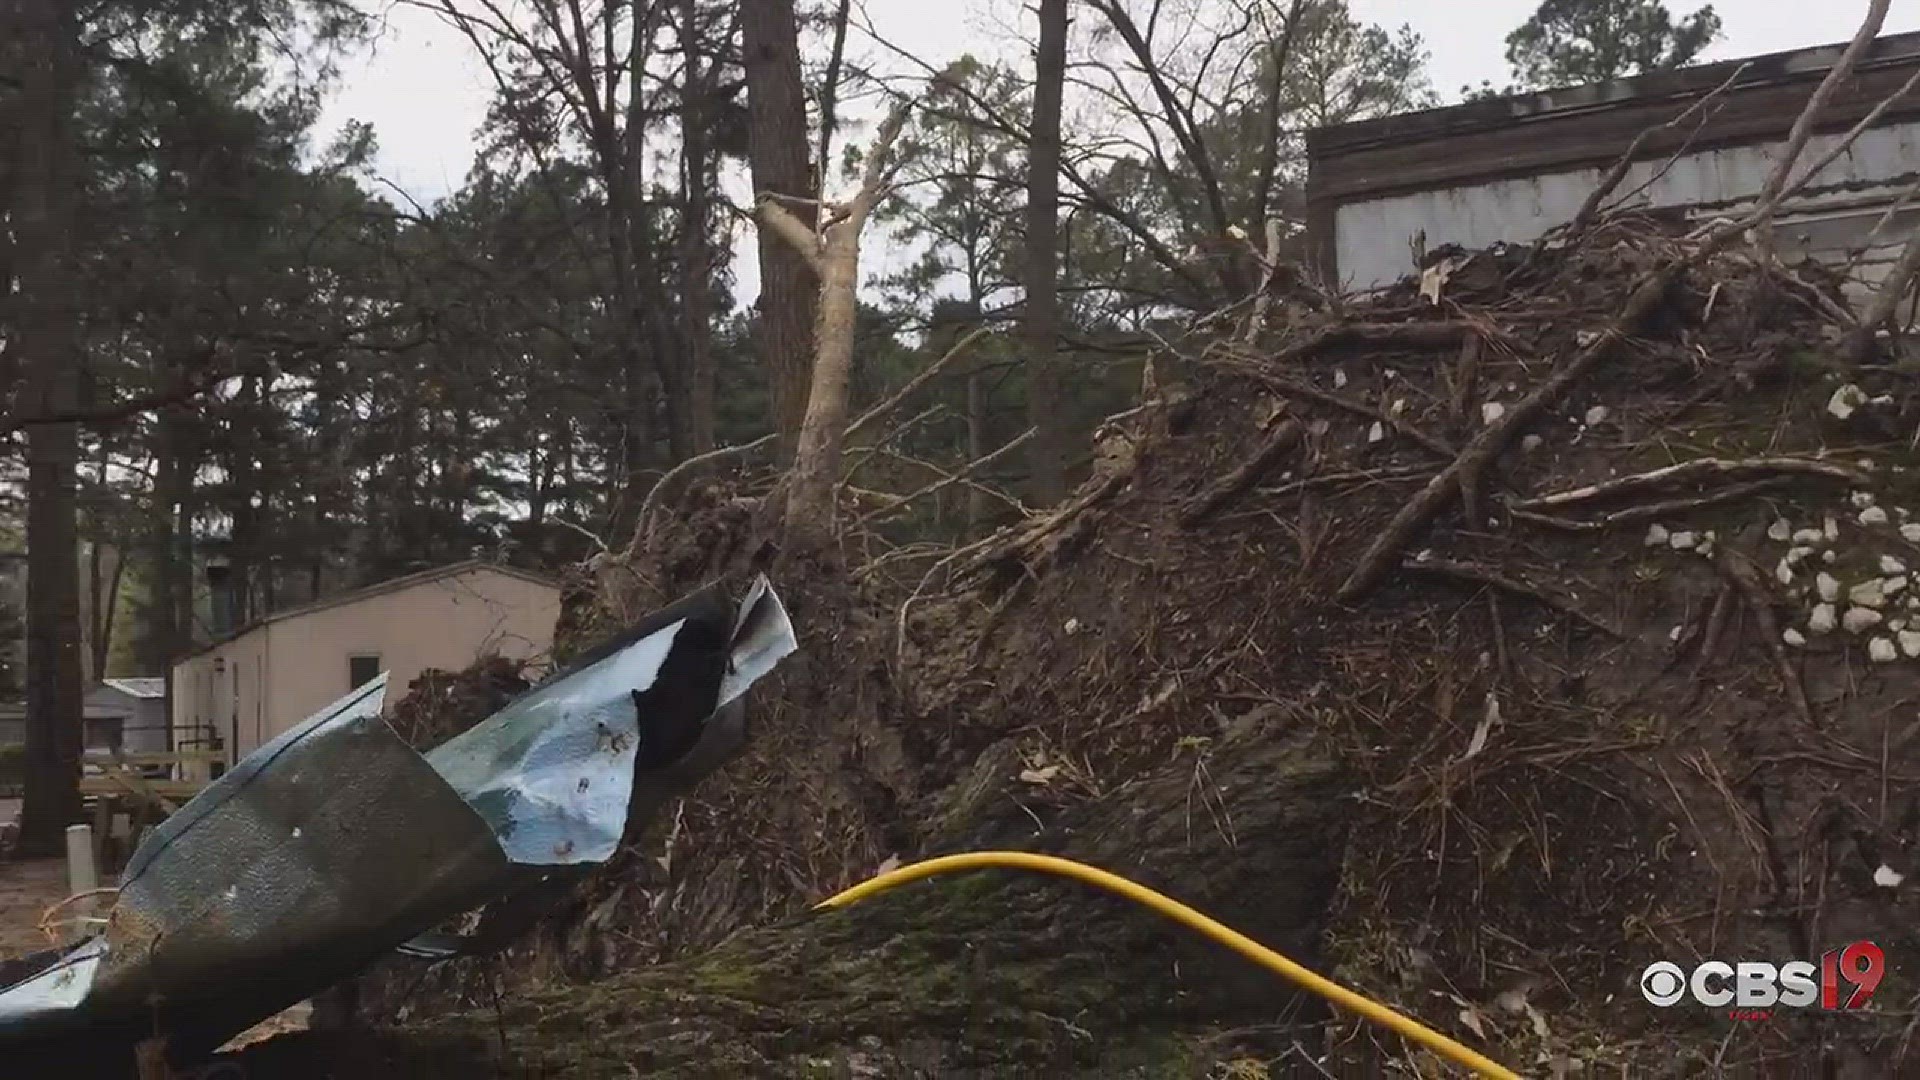 A father was killed when this huge tree crashed into the mobile home during the storm overnight.